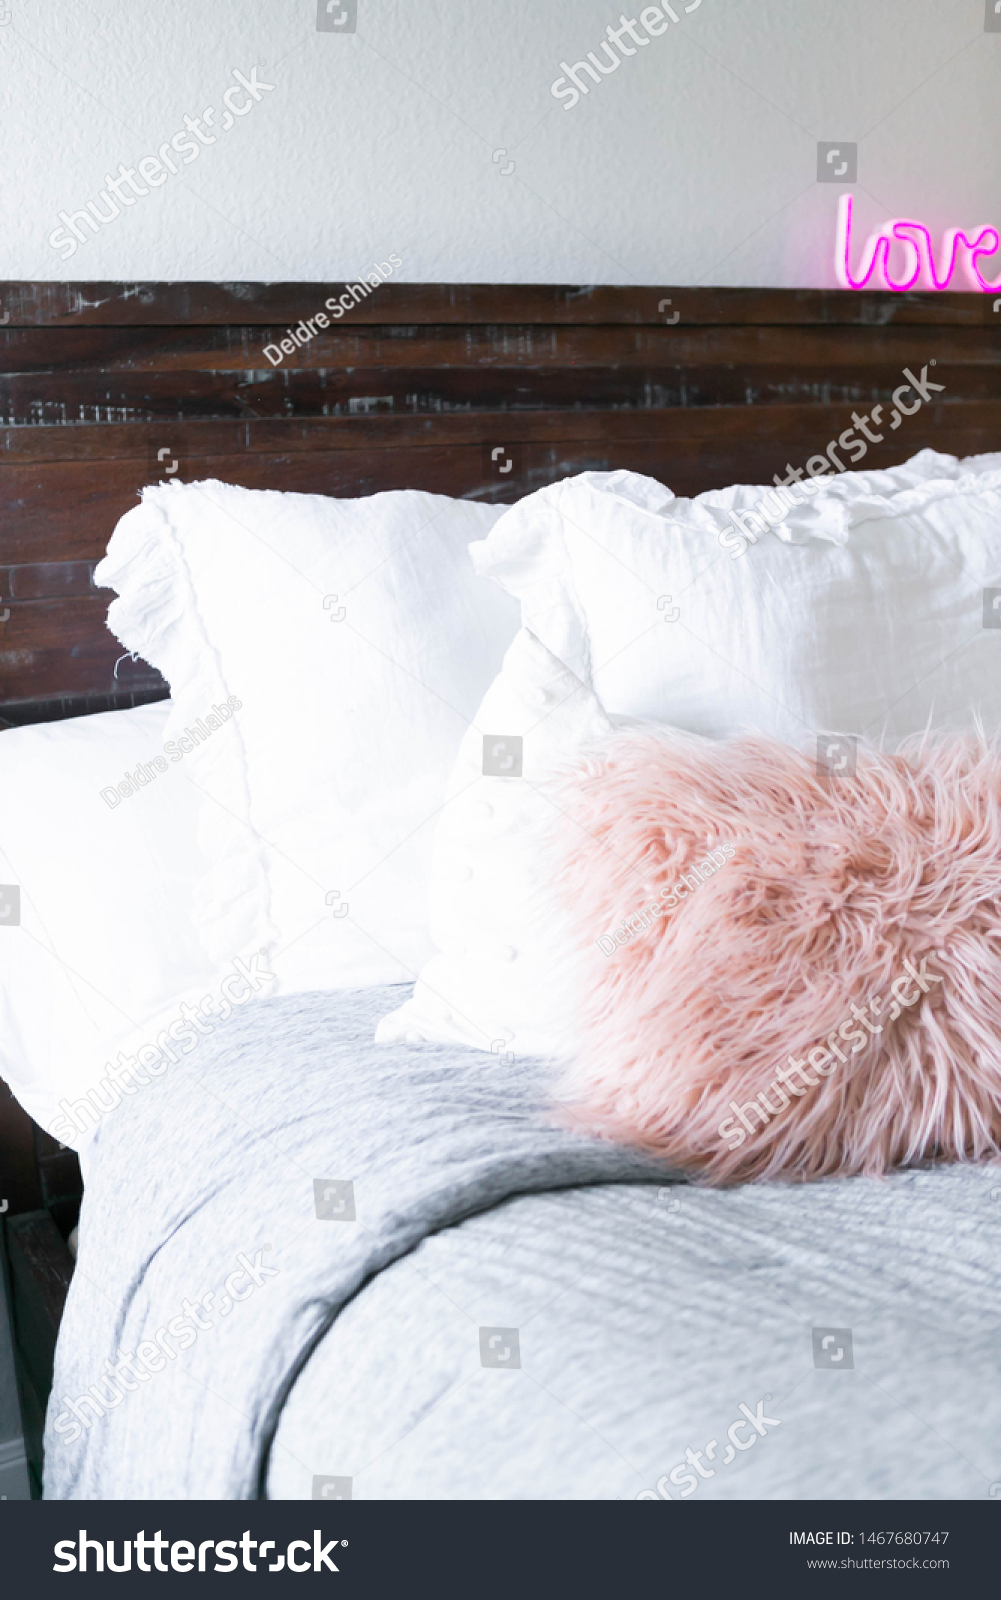 Modern Bed Decorative Pillows Neon Sign Stock Photo Edit